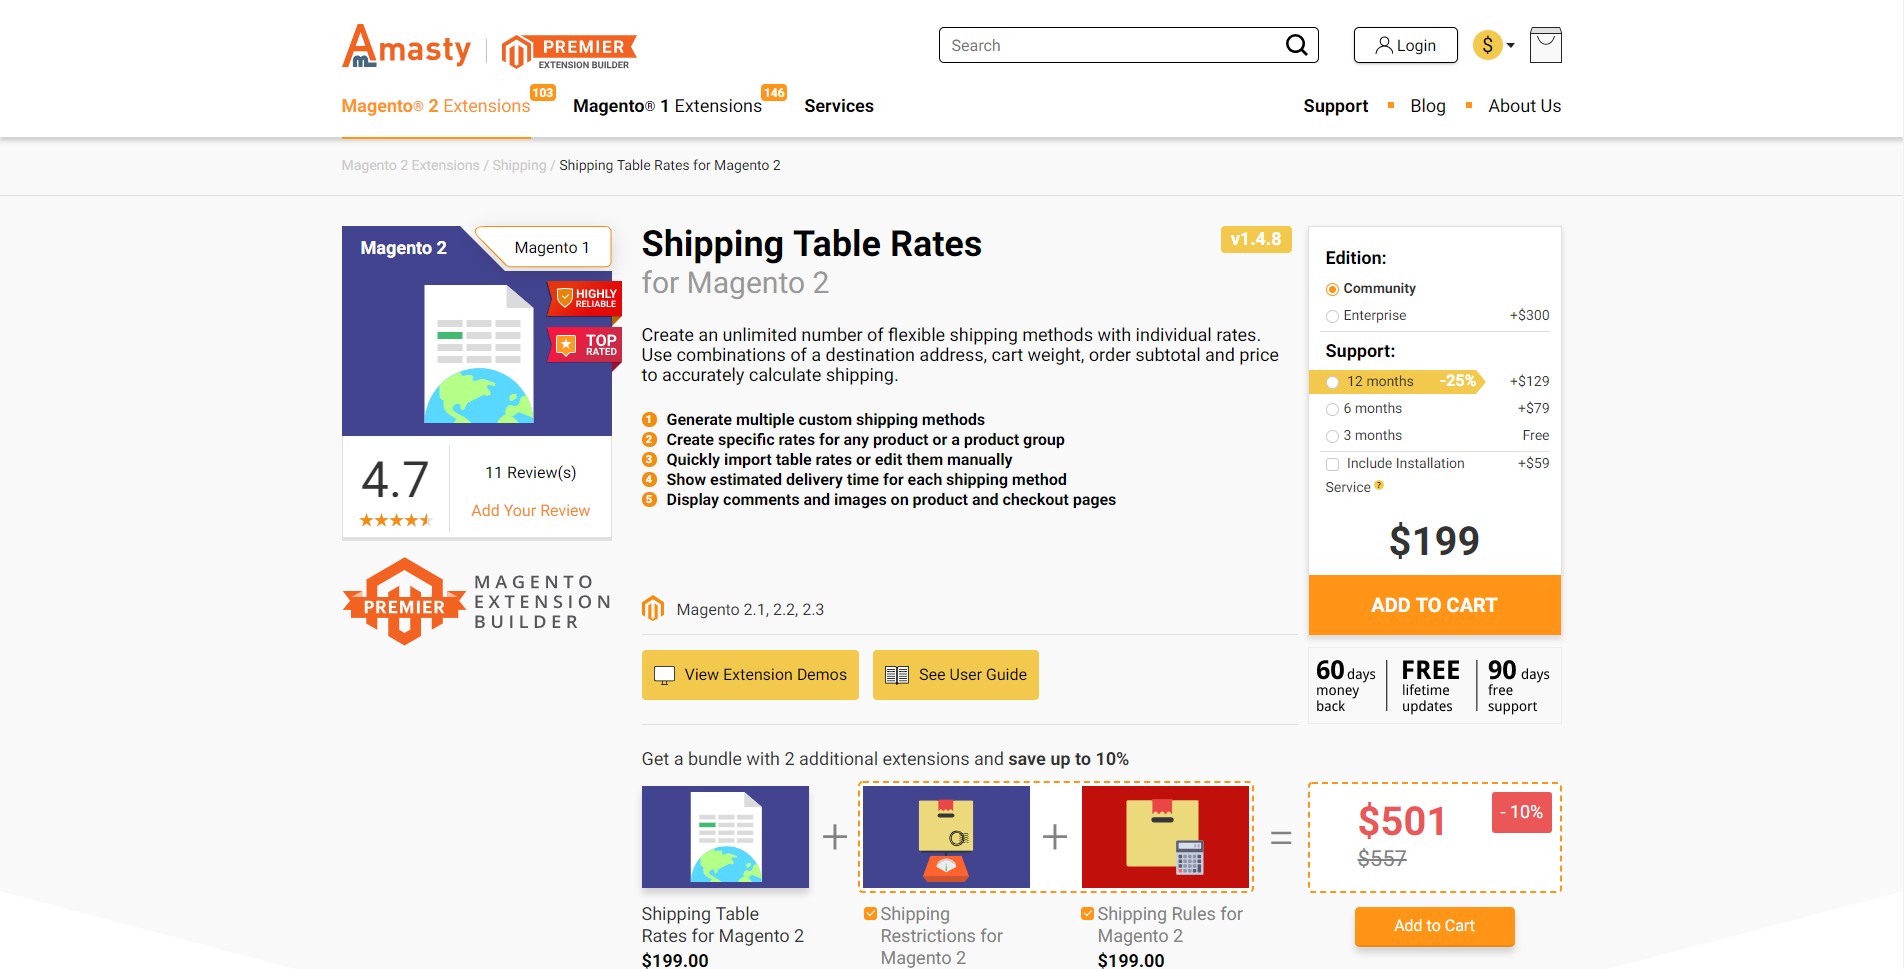 Shipping Table Rates for Magento 2 